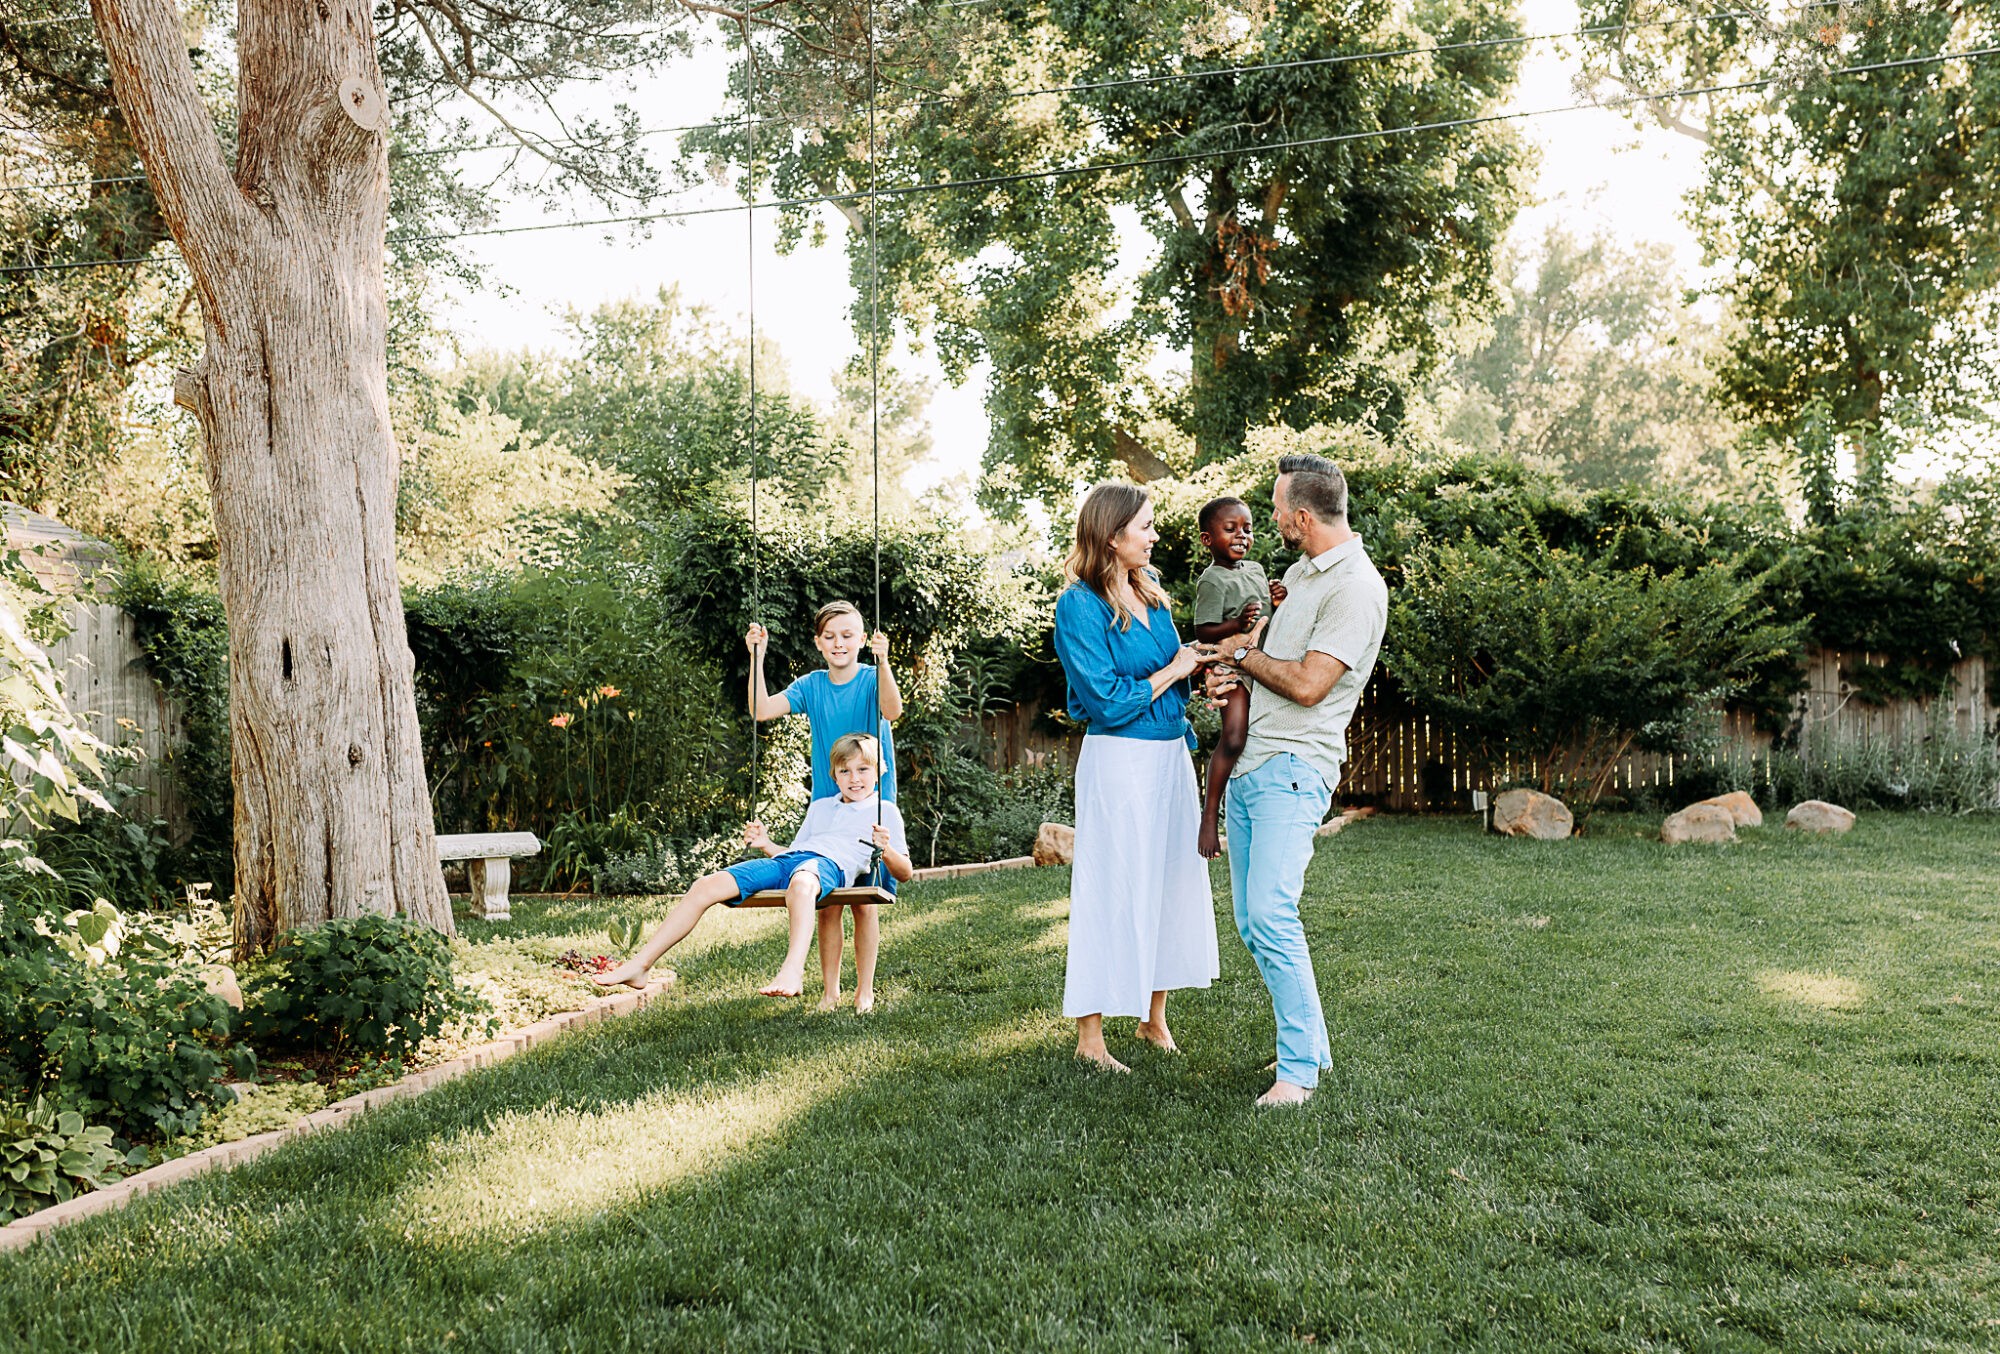 Norman family hangs out in their backyard during their family photo session.